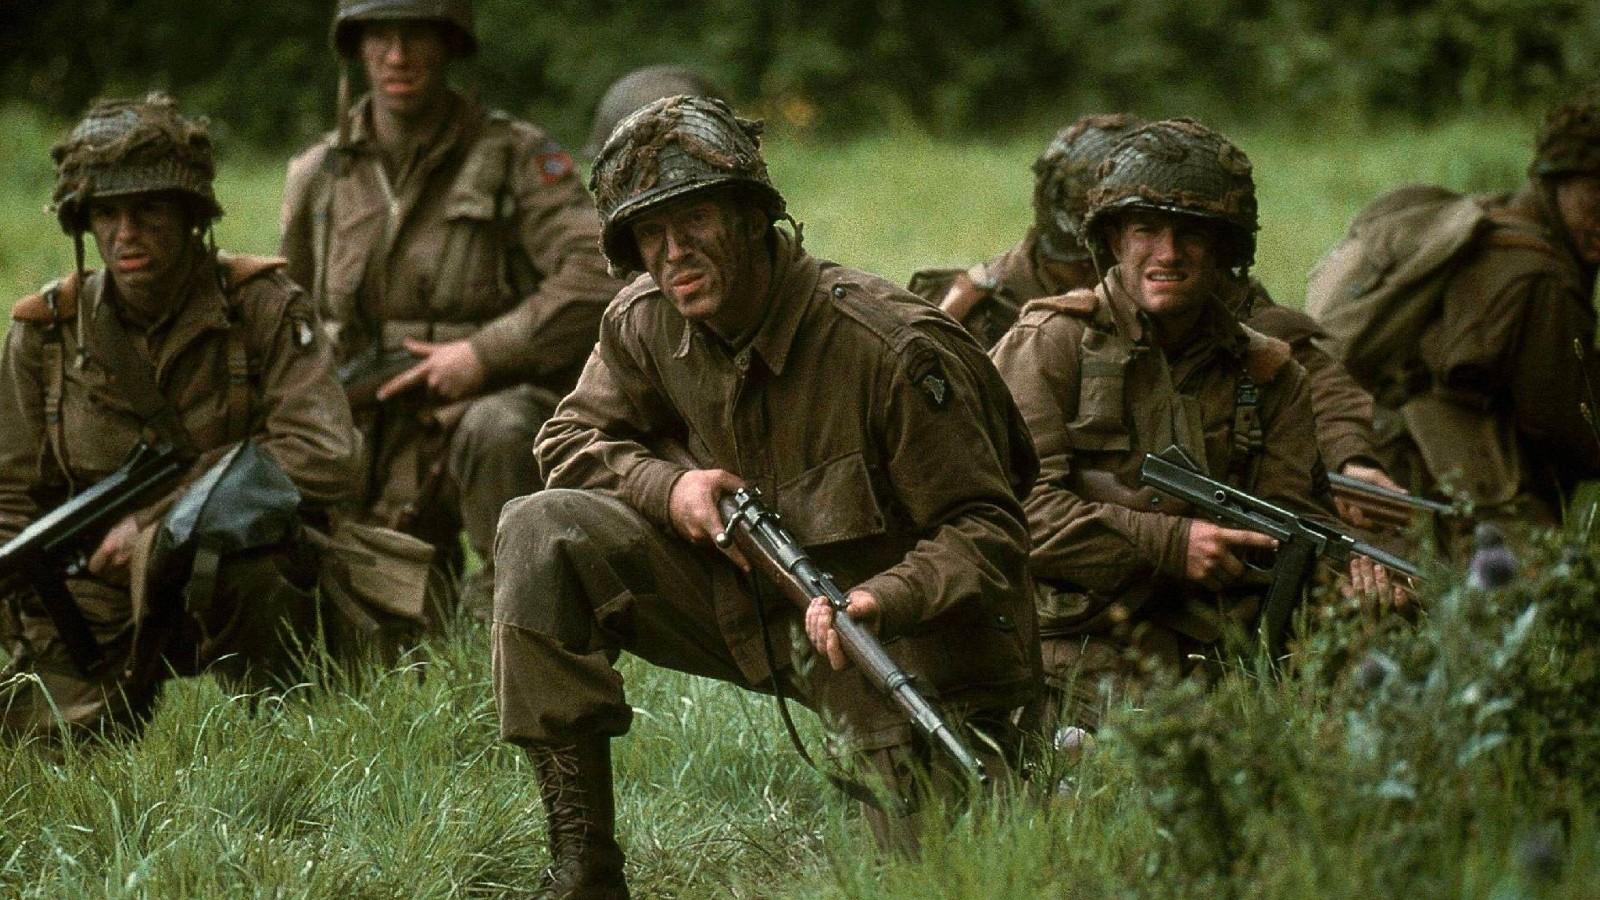 The cast of Band of Brothers, streaming on Netflix now